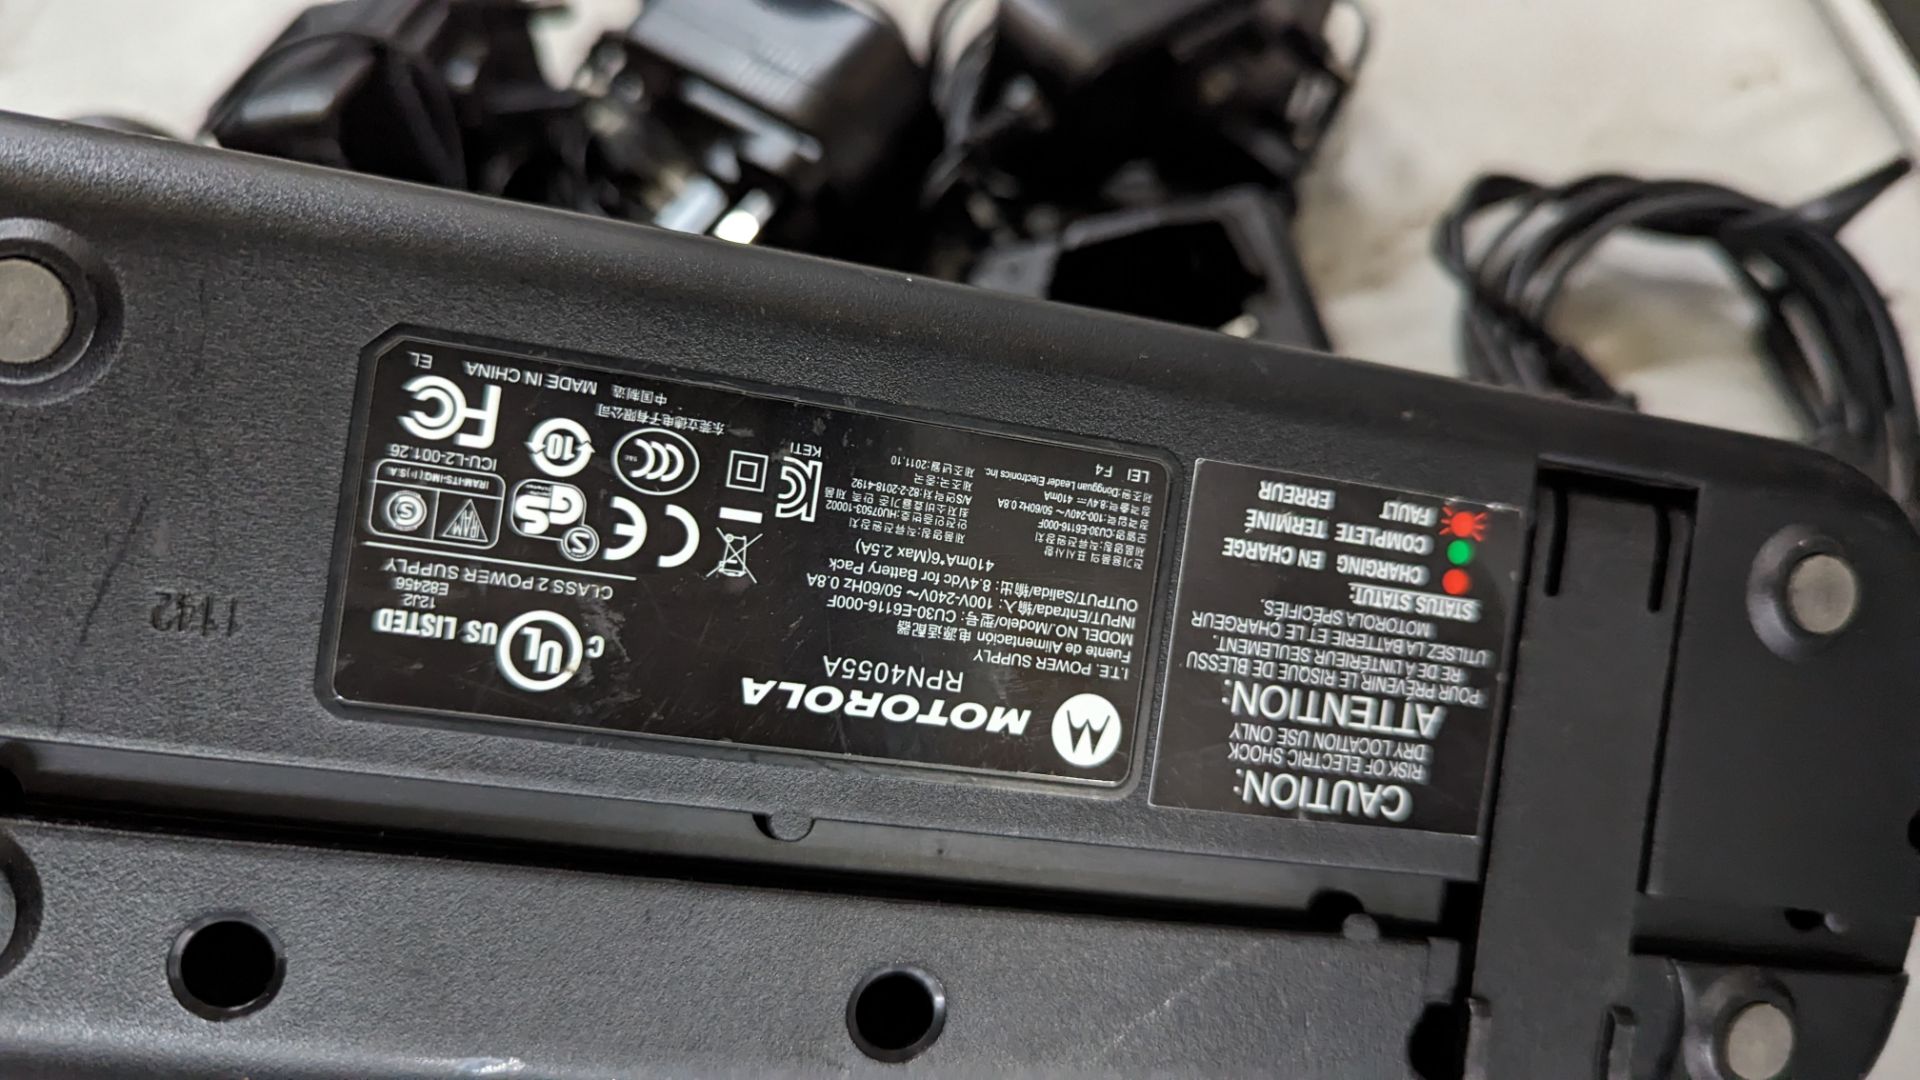 Motorola charging unit comprising 1 off 6-bay, model RPN4055A charger and 5 off individual model RLN - Image 3 of 8